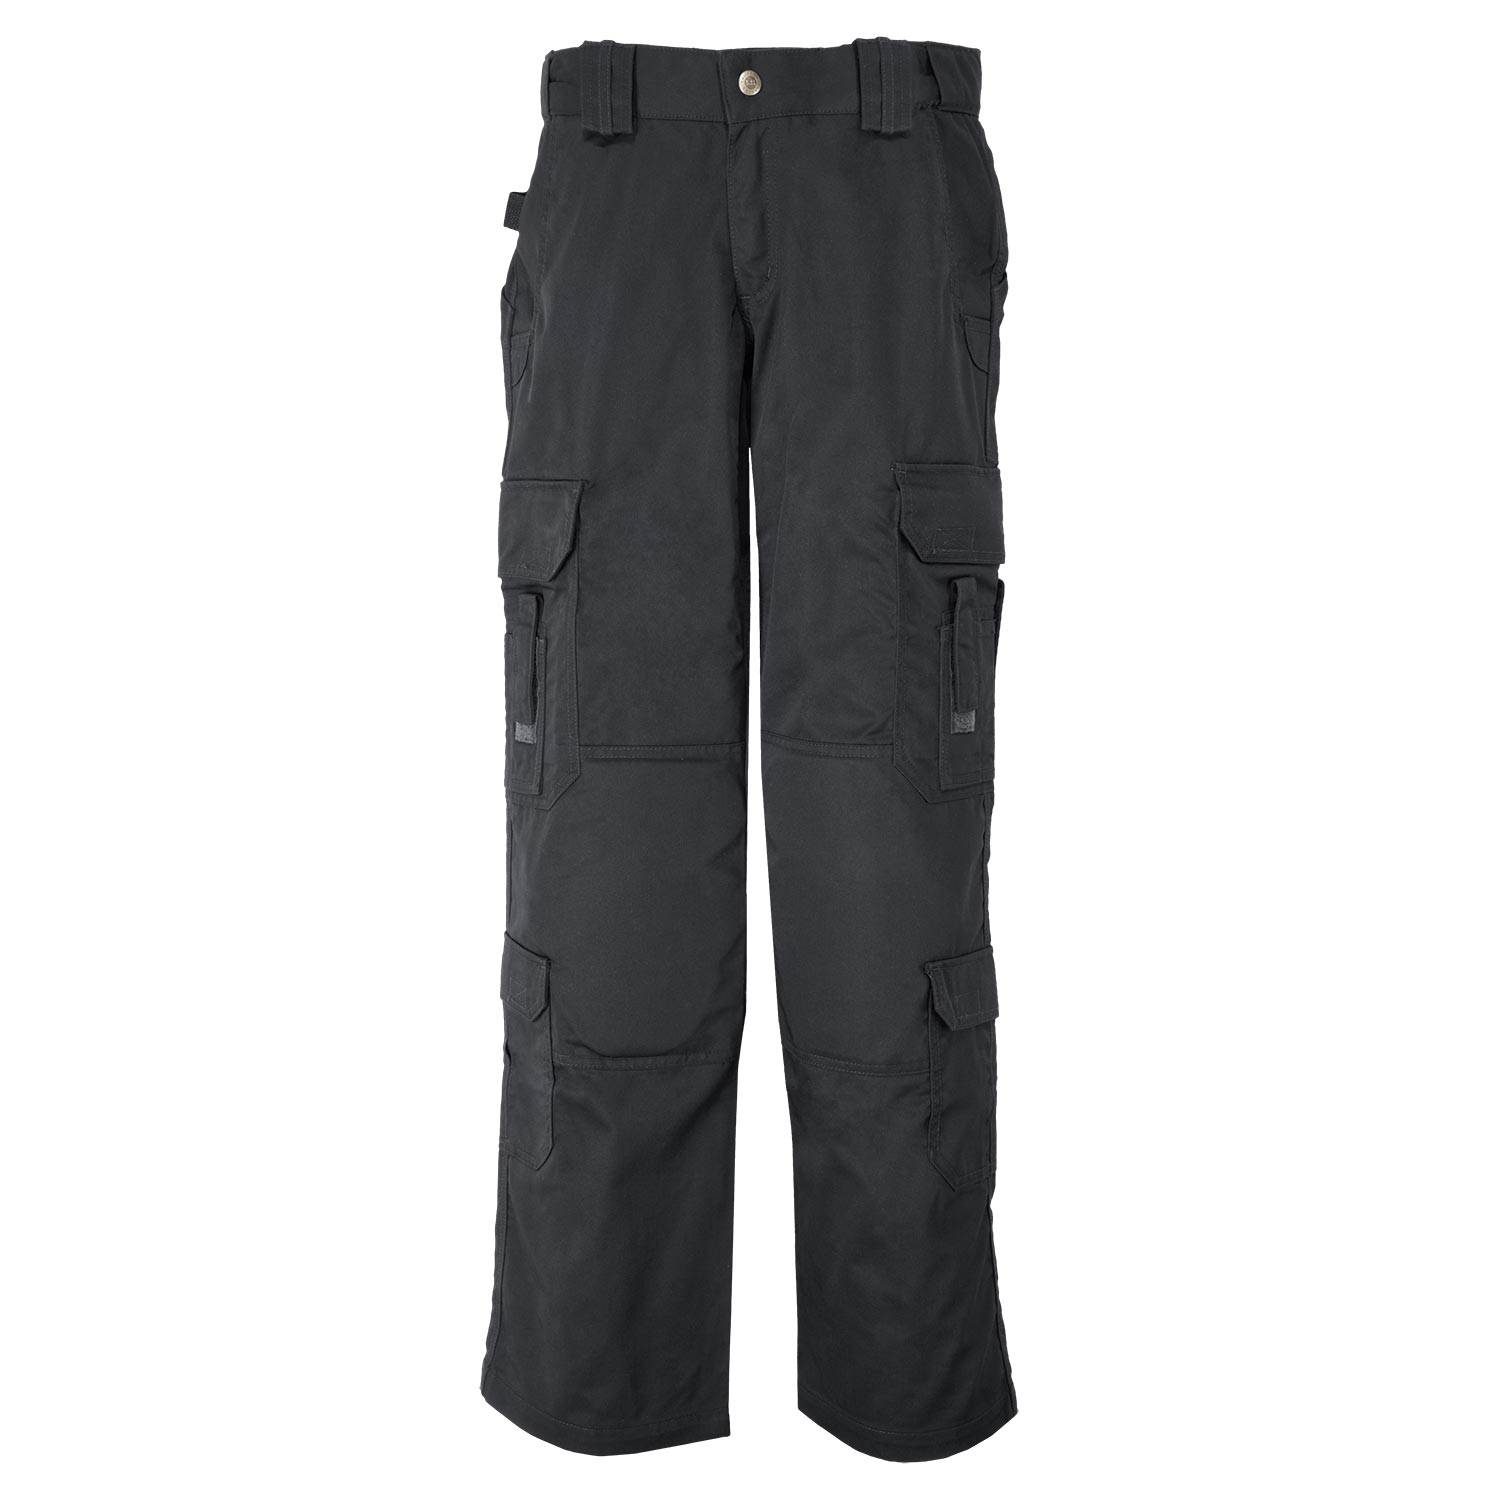 5.11 TACTICAL WOMEN'S PANTS FOR EMS